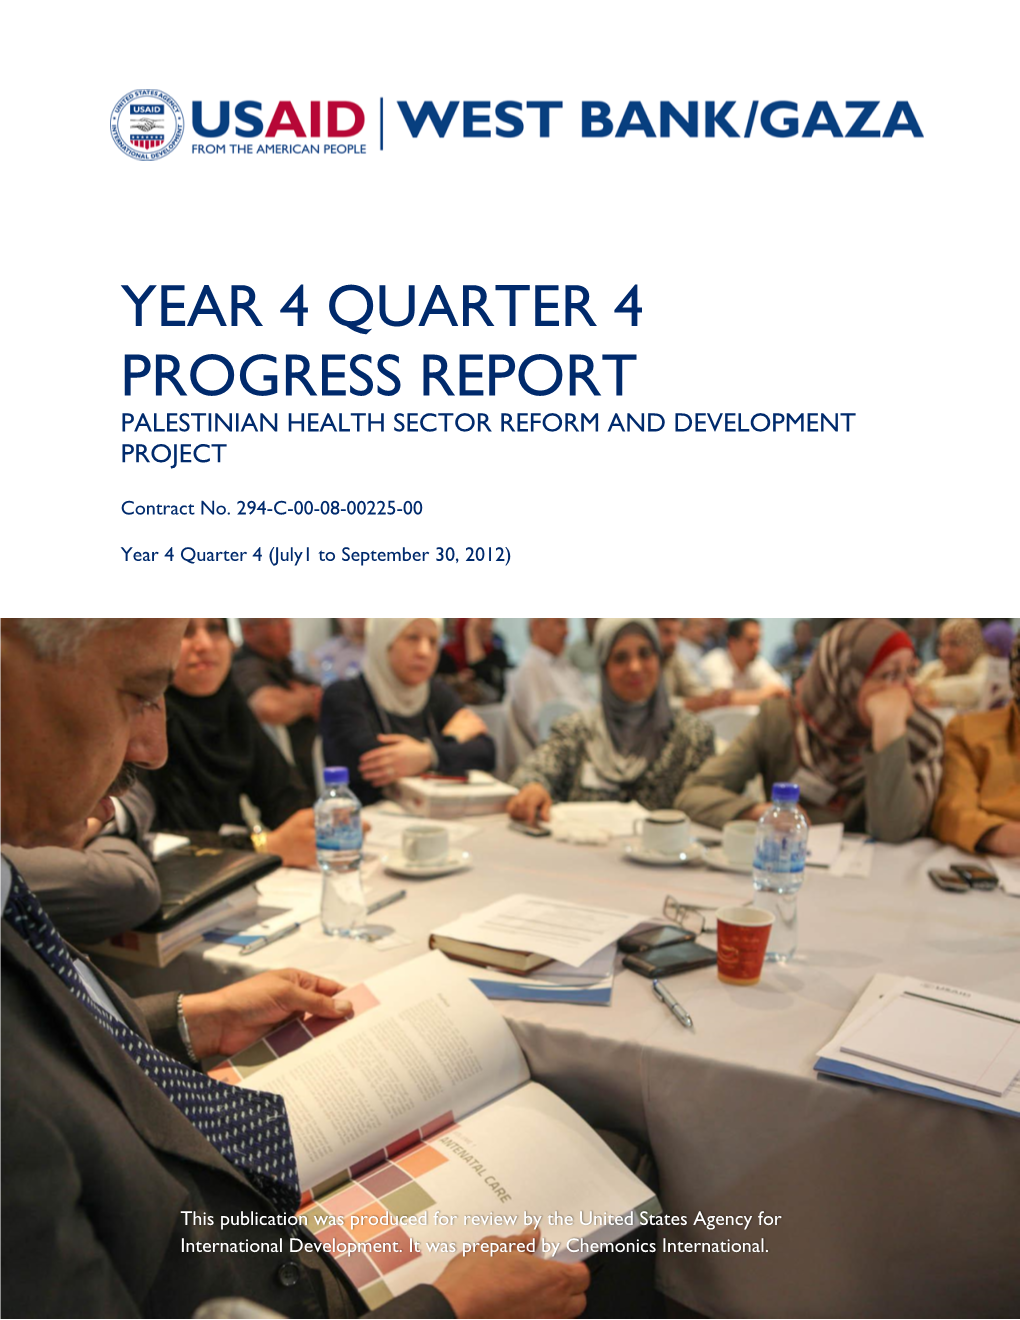 Year 4 Quarter 4 Progress Report Palestinian Health Sector Reform and Development Project